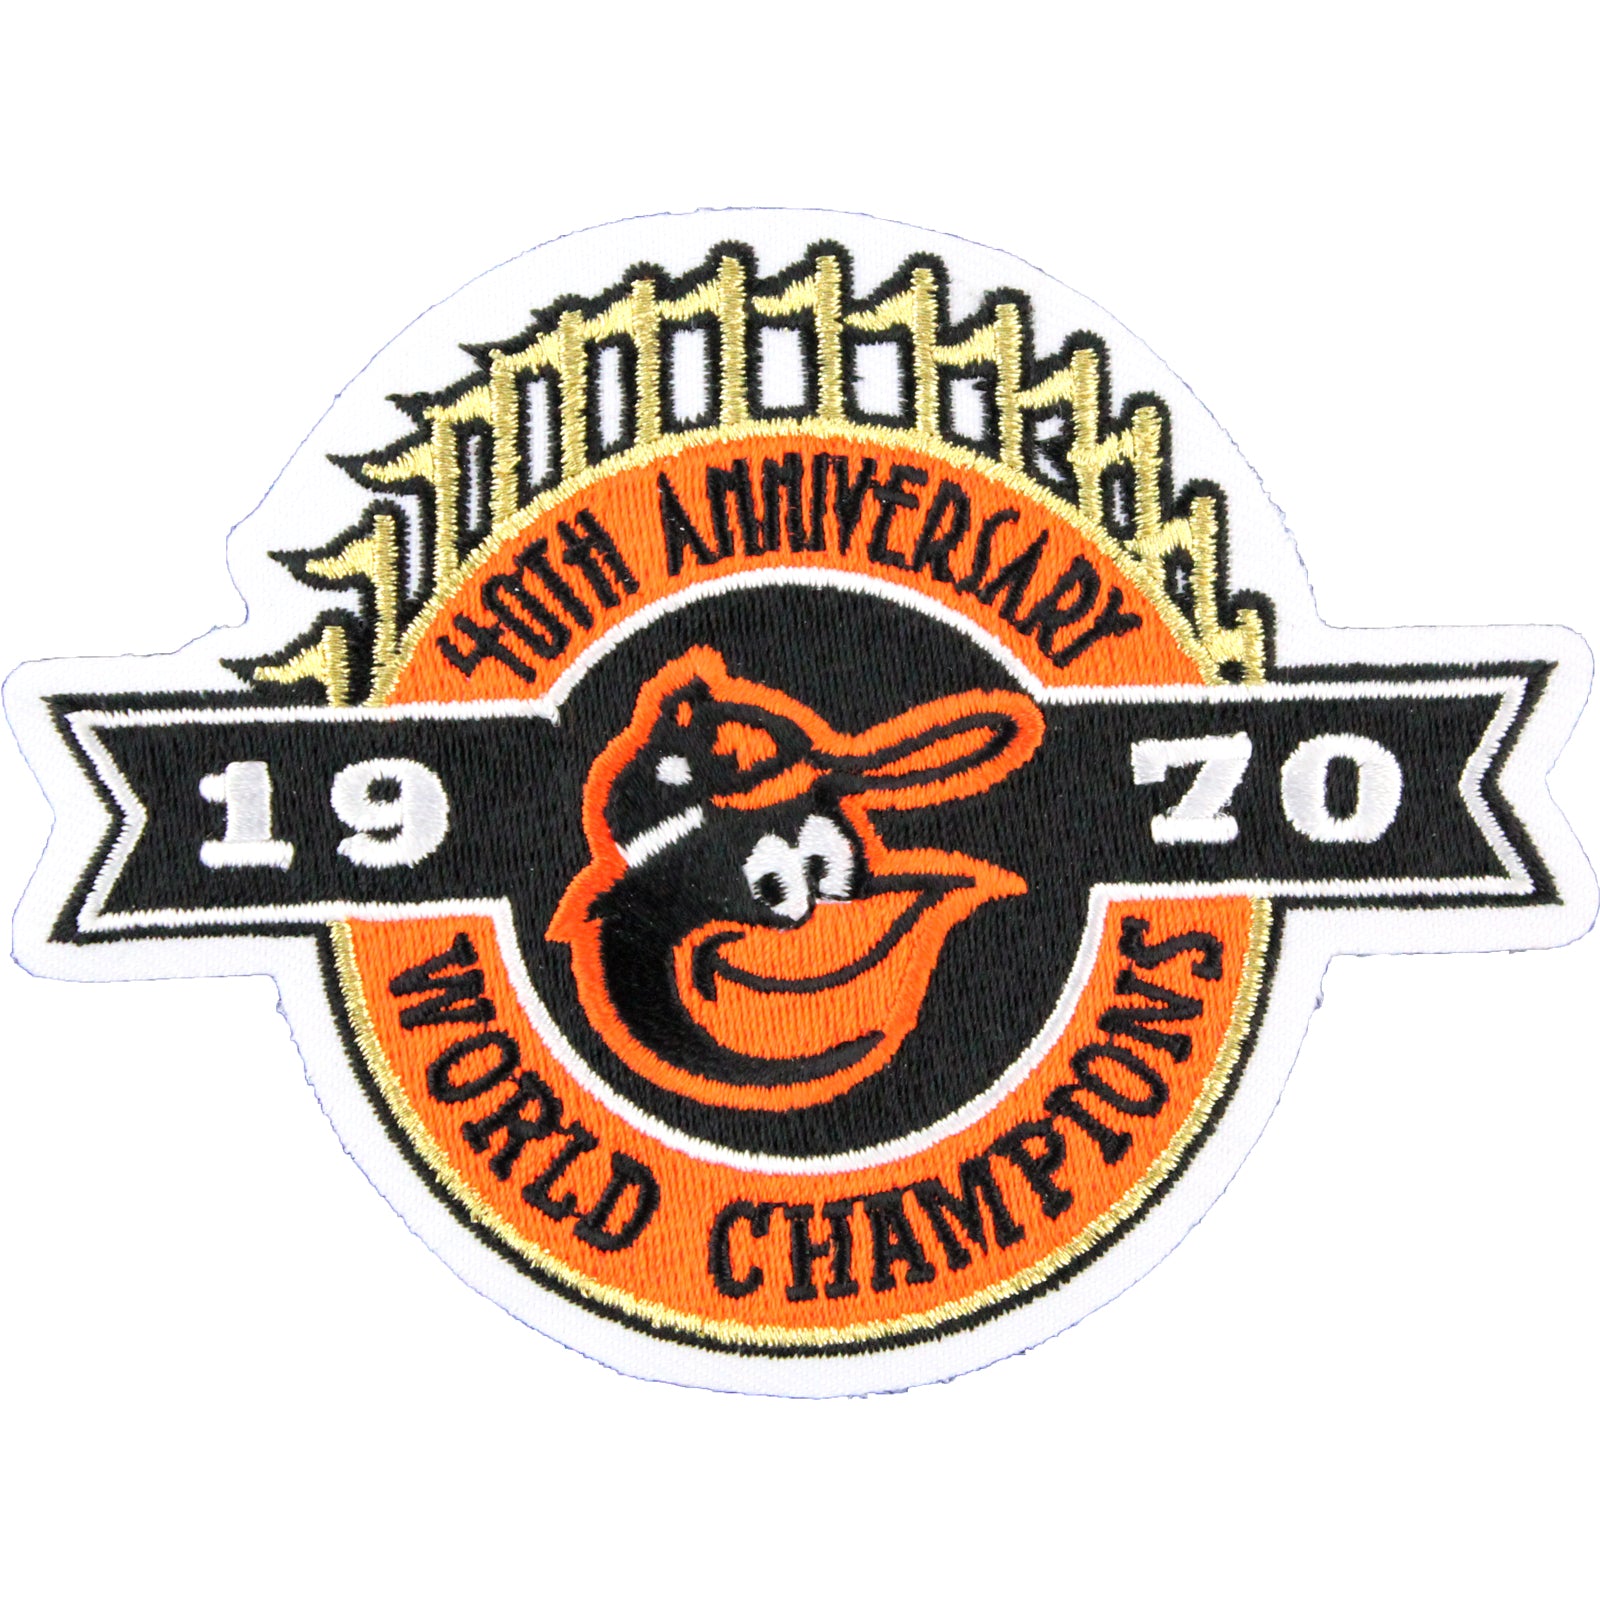 1970 Baltimore Orioles World Championship Ring Presented to Harry, Lot  #80090